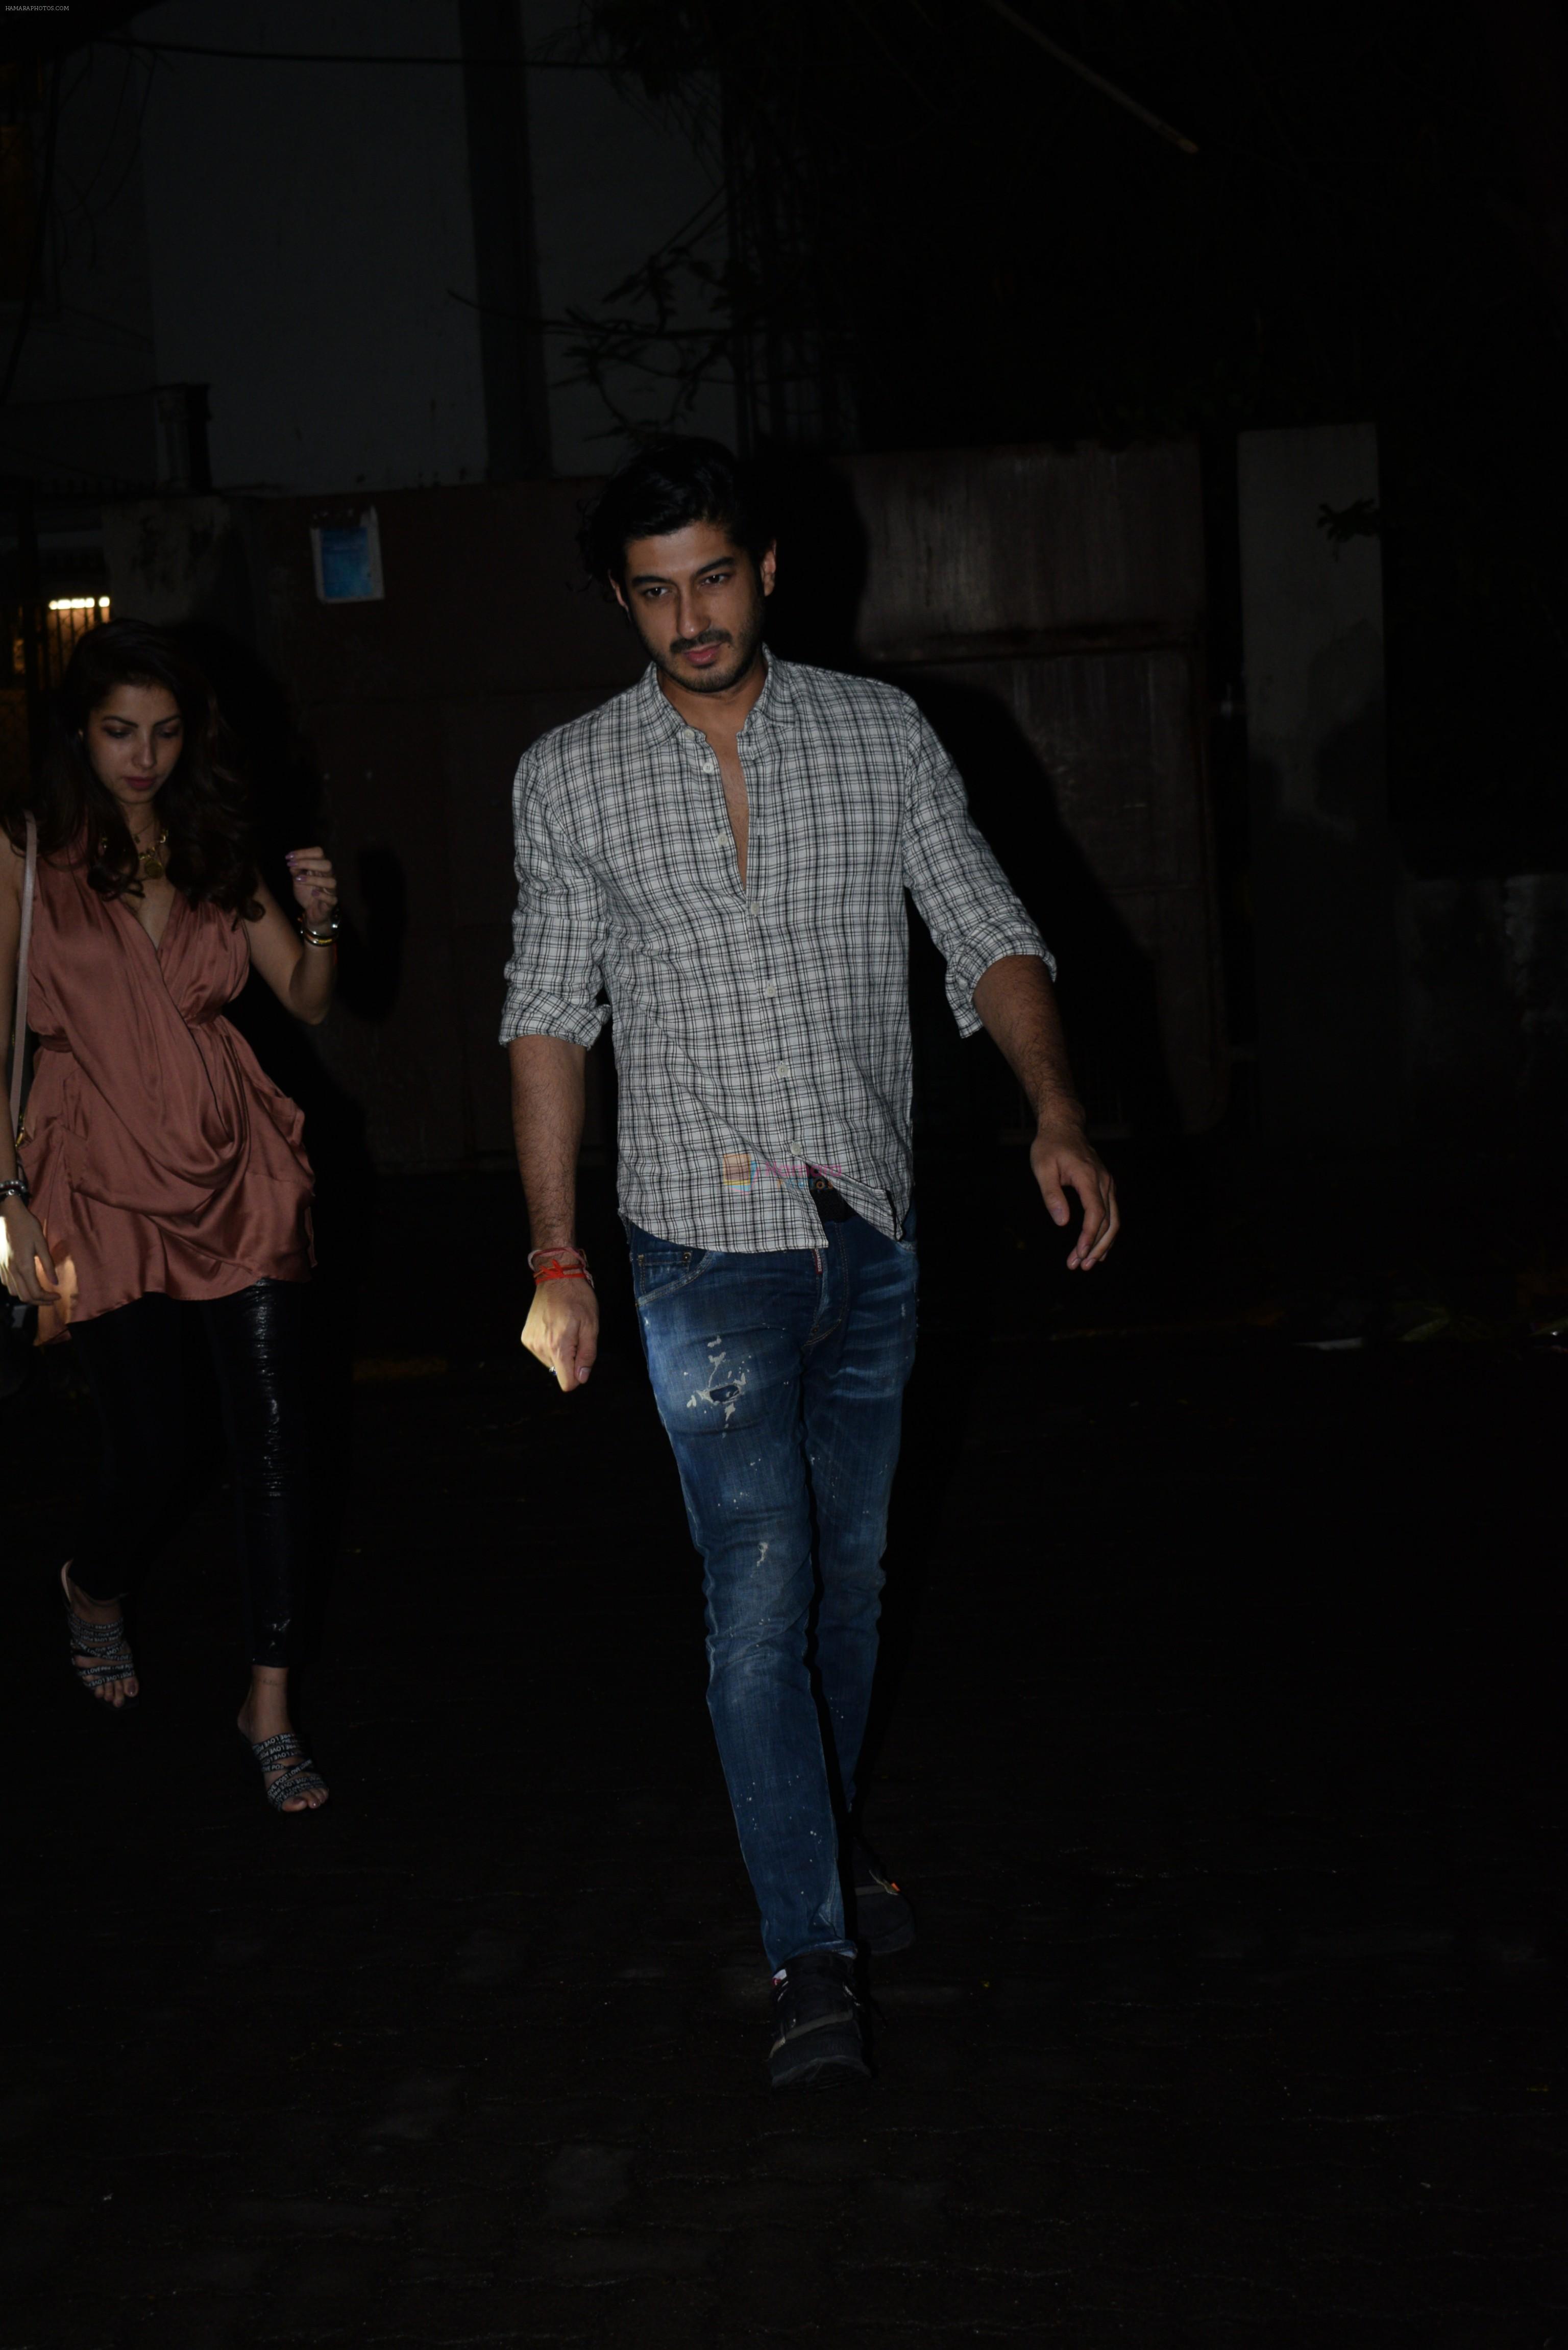 Mohit Marwah at Rohini Iyyer's party on 16th June 2019